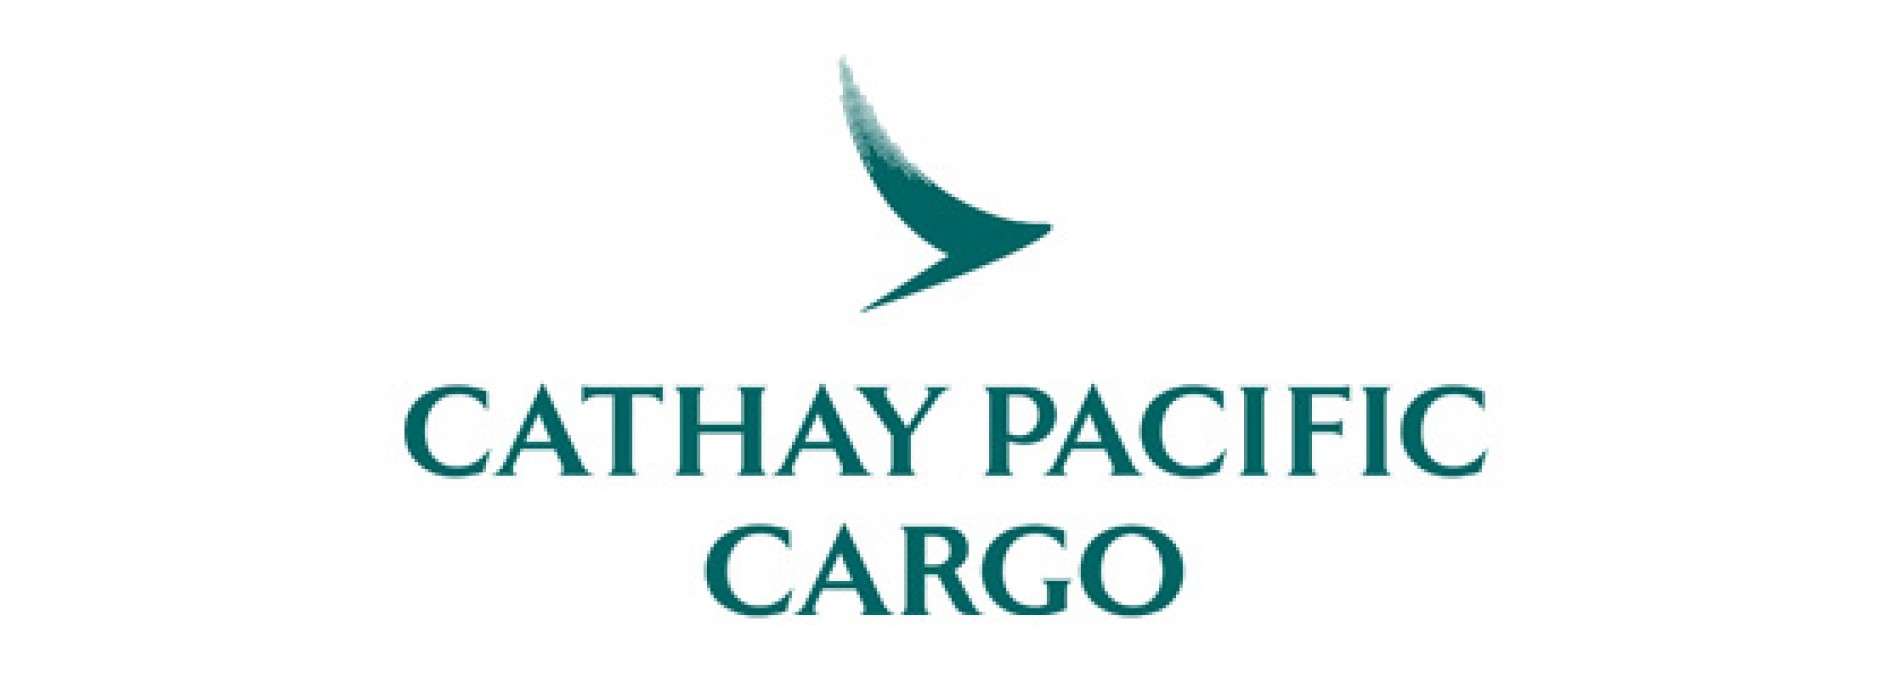 Cathay Pacific enters into leasing partnership with Sonoco